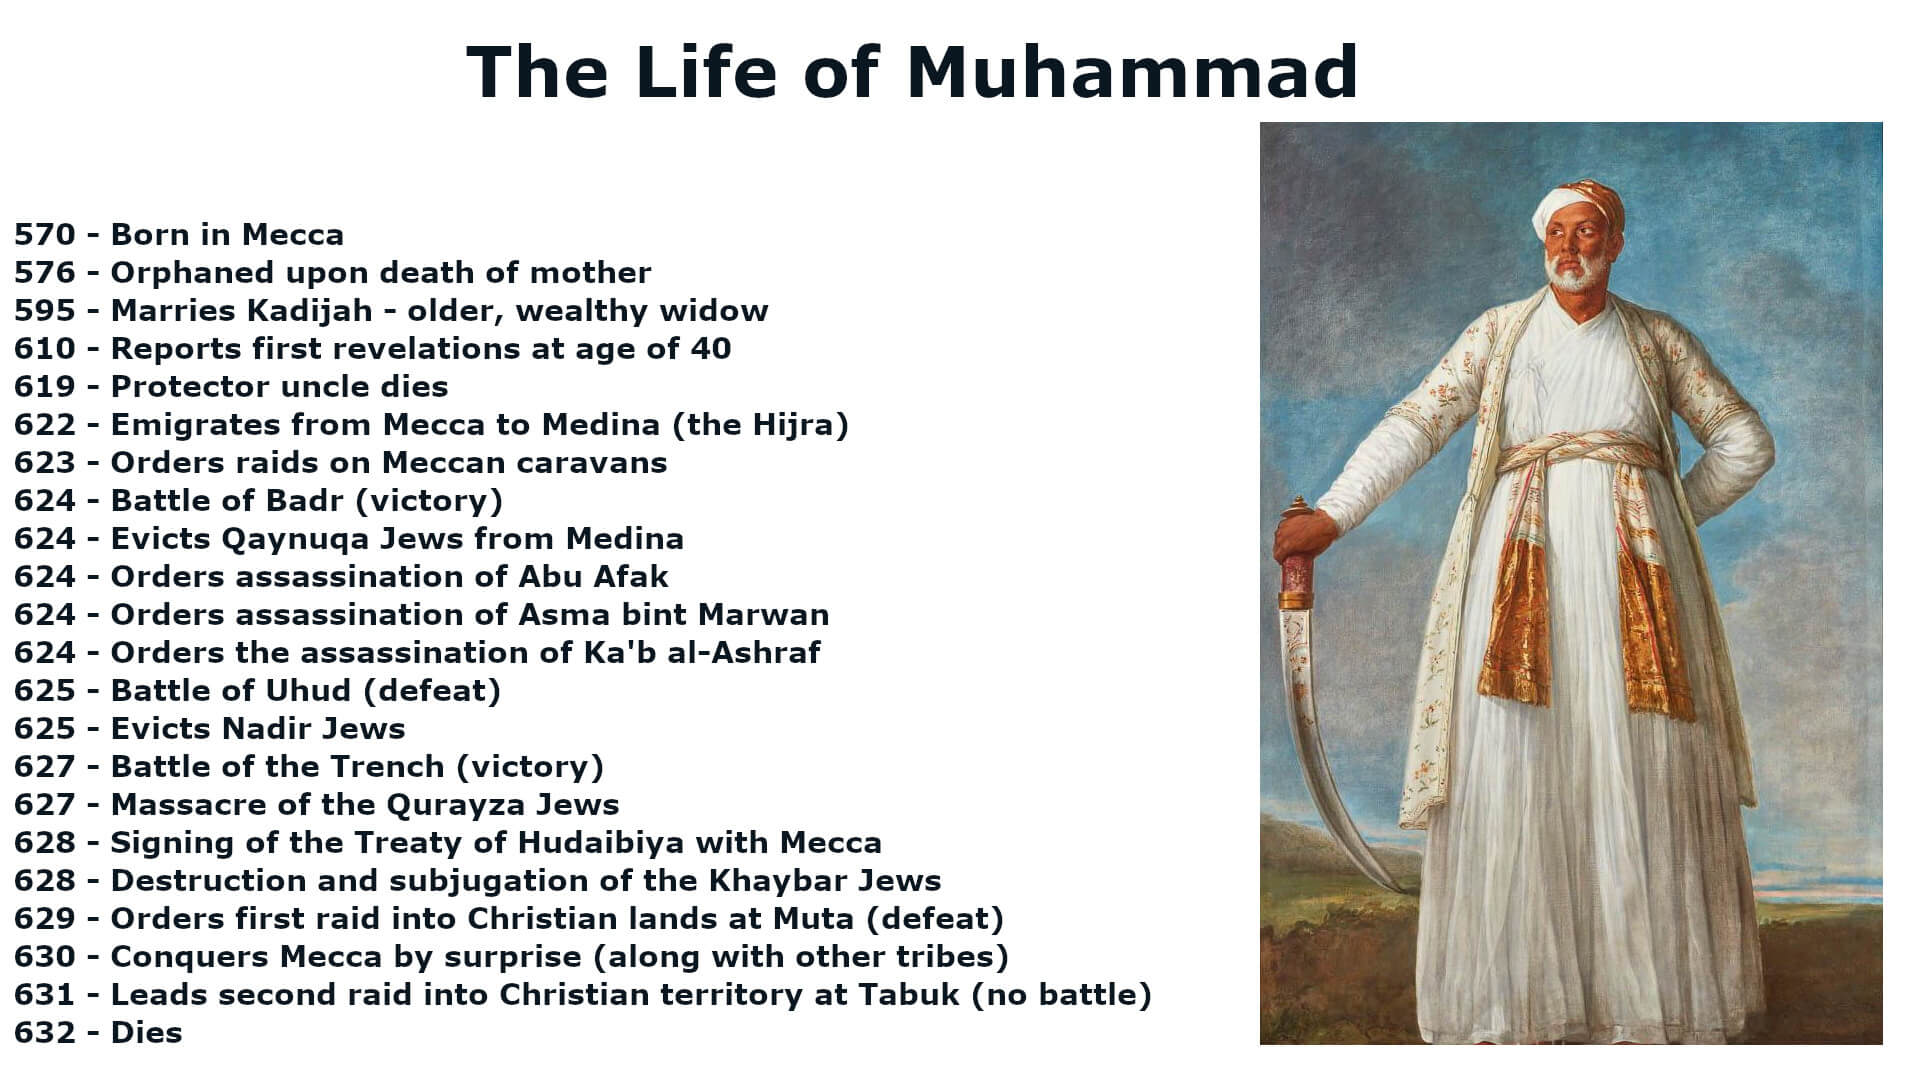 The Official Life History of Muhammad as per Islamic sources.